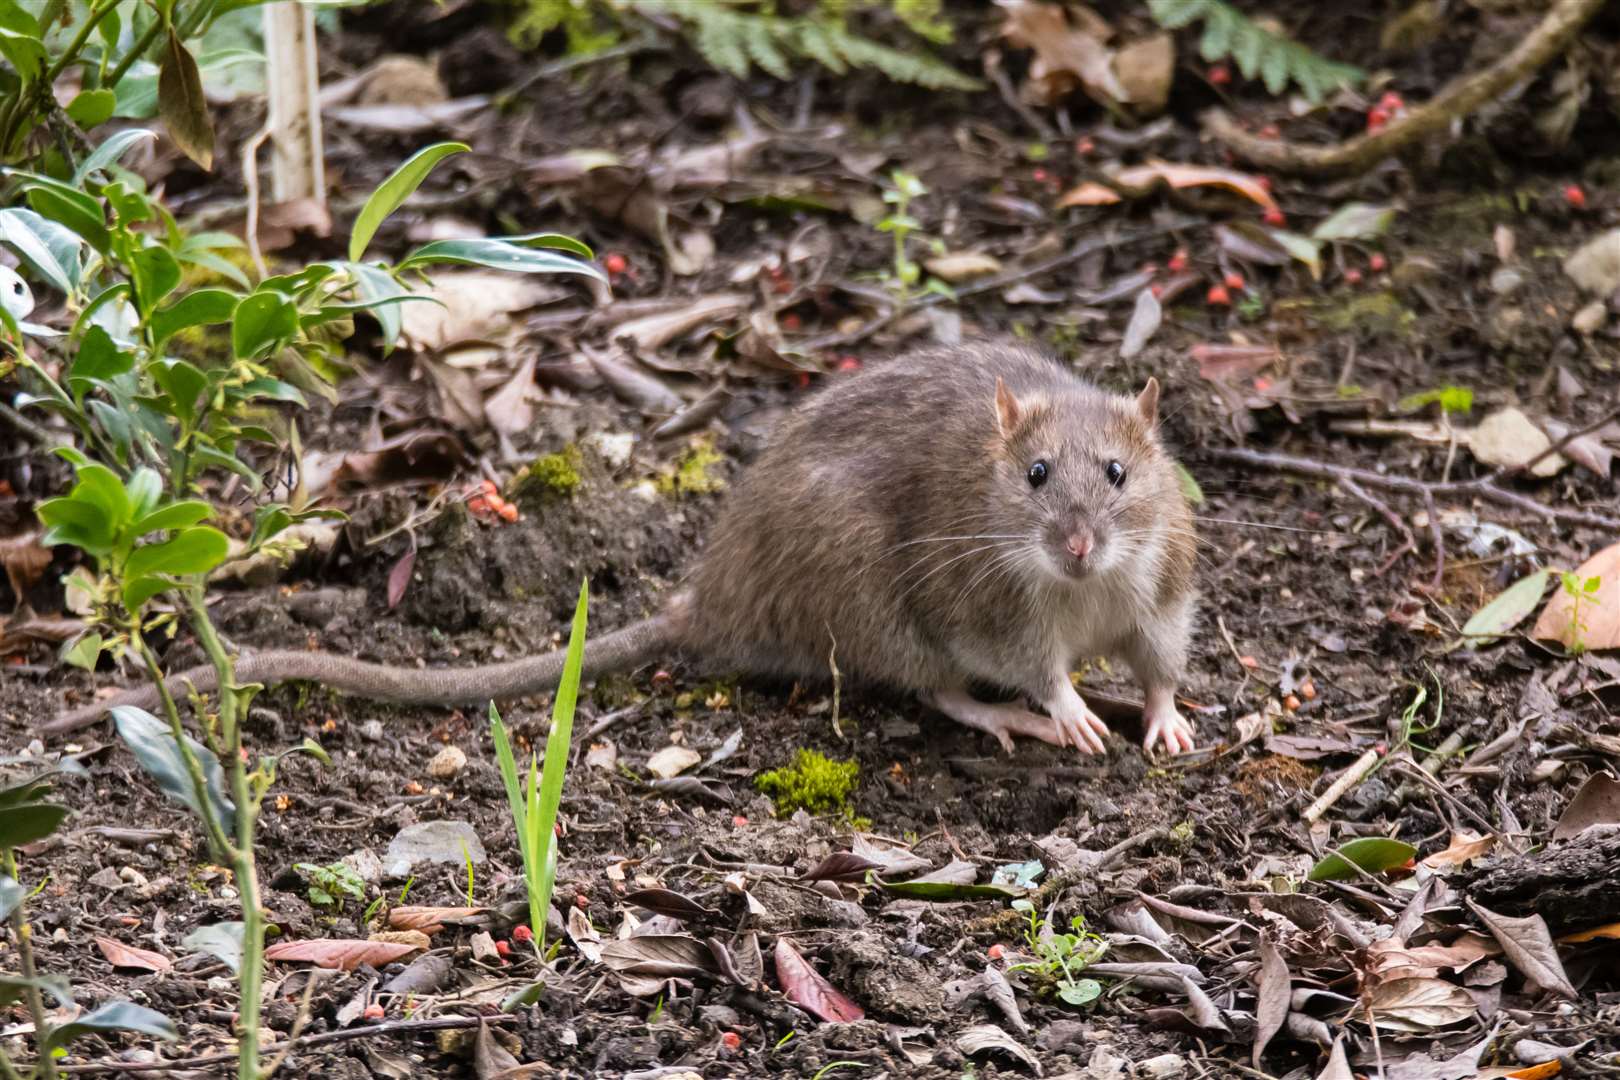 A sudden increase in dumped pumpkins can encourage rats, warns the Woodland Trust